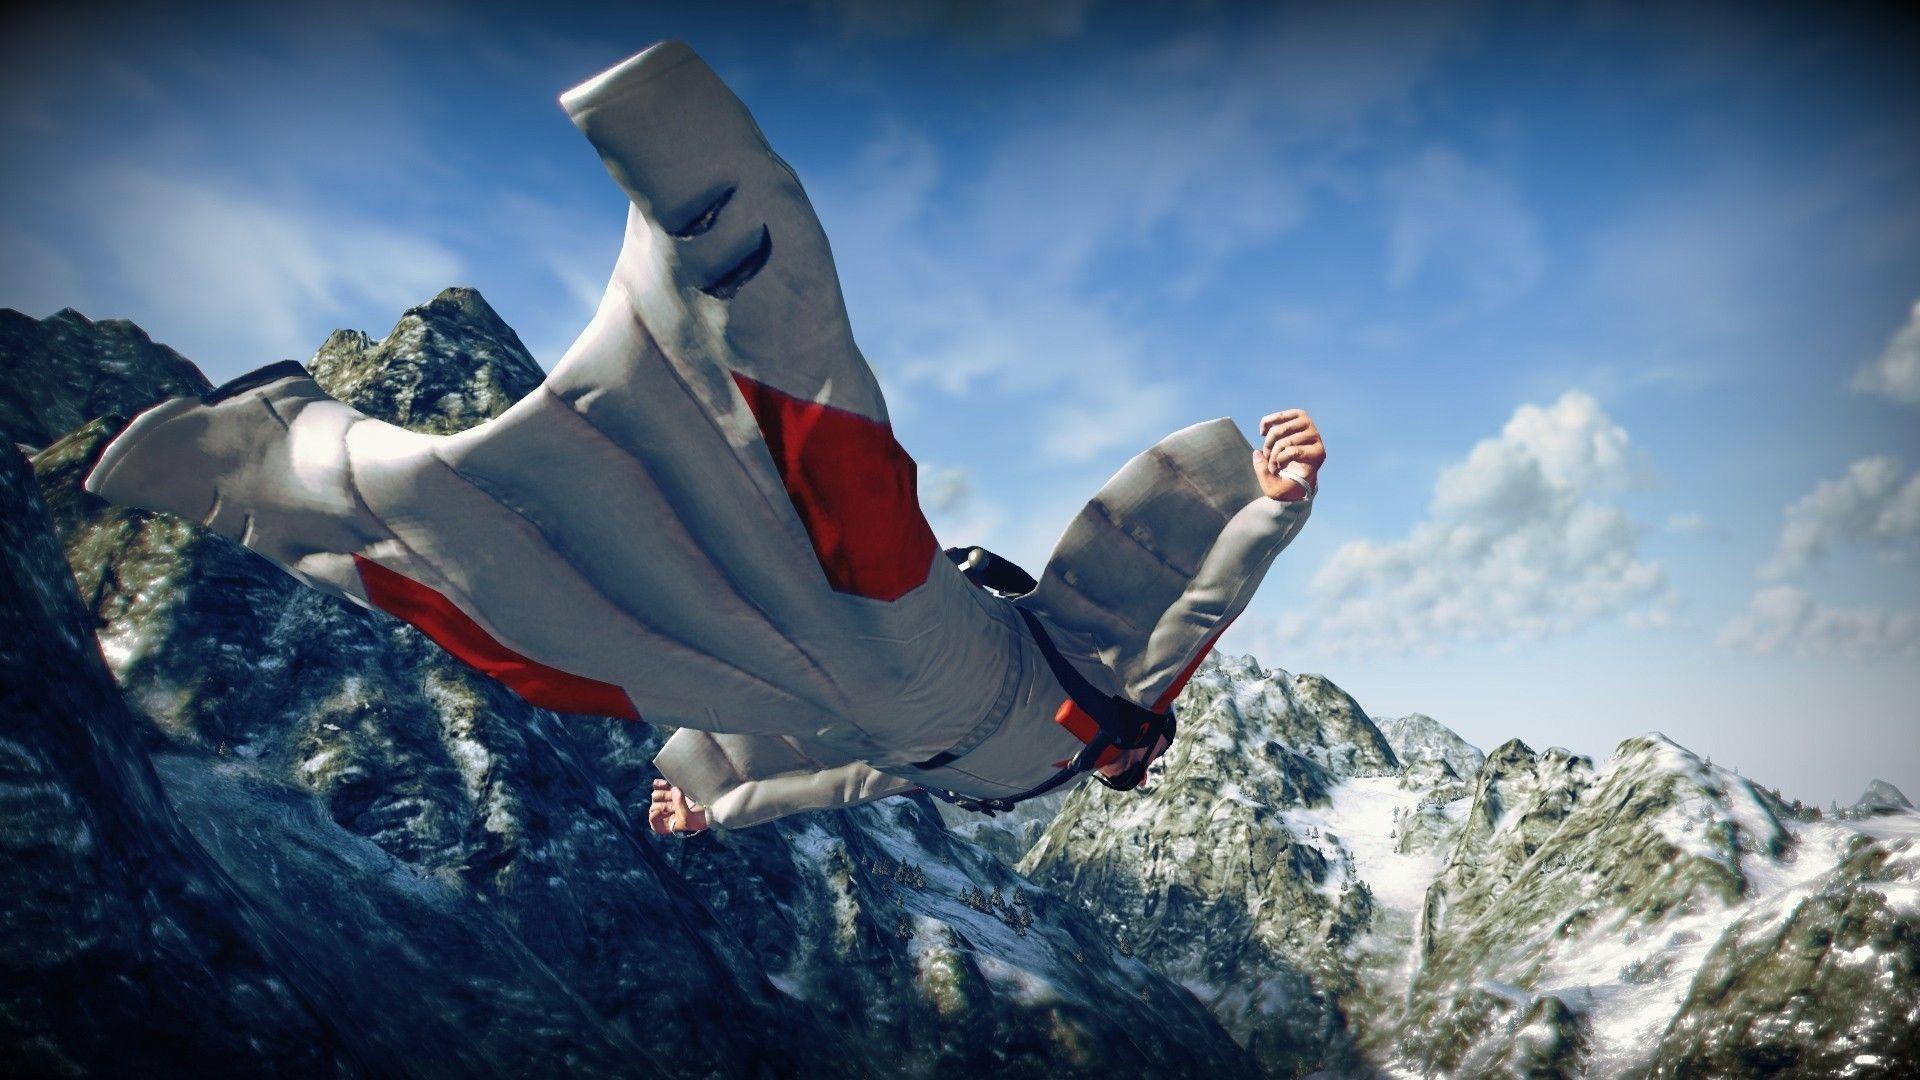 sports skydiving extreme sports parachute wingsuit. Adventurers